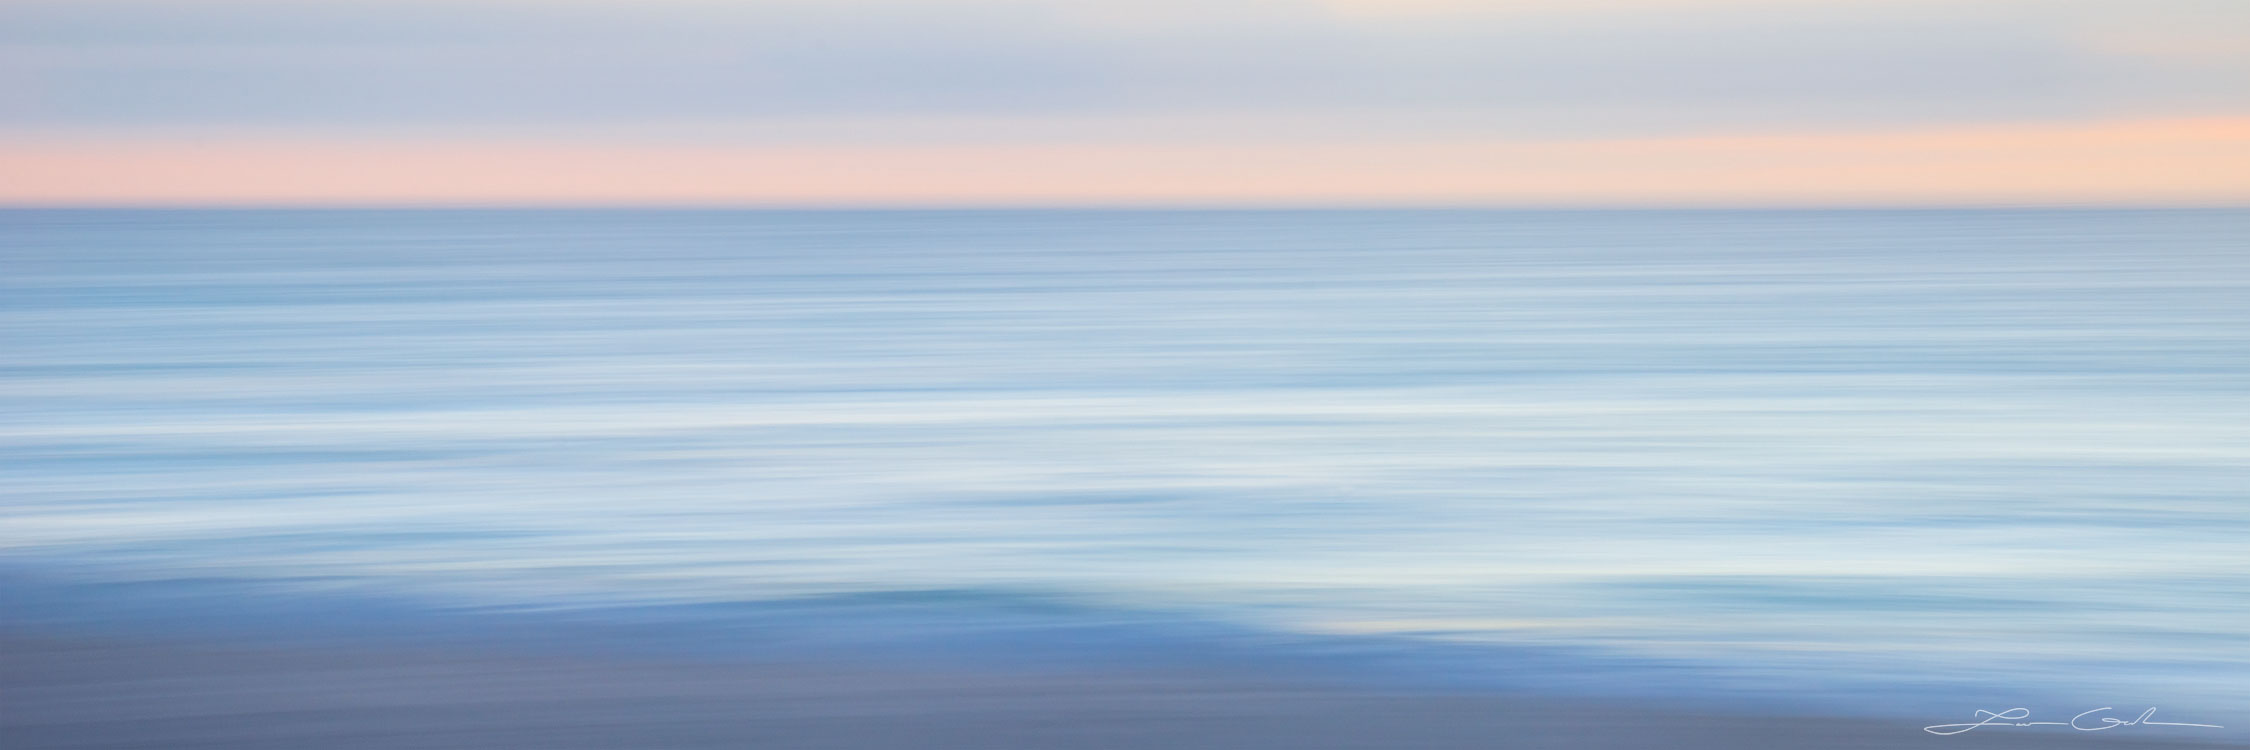 Abstract seascape panorama with blue ocean water and some pink clouds - Gintchin Fine Art